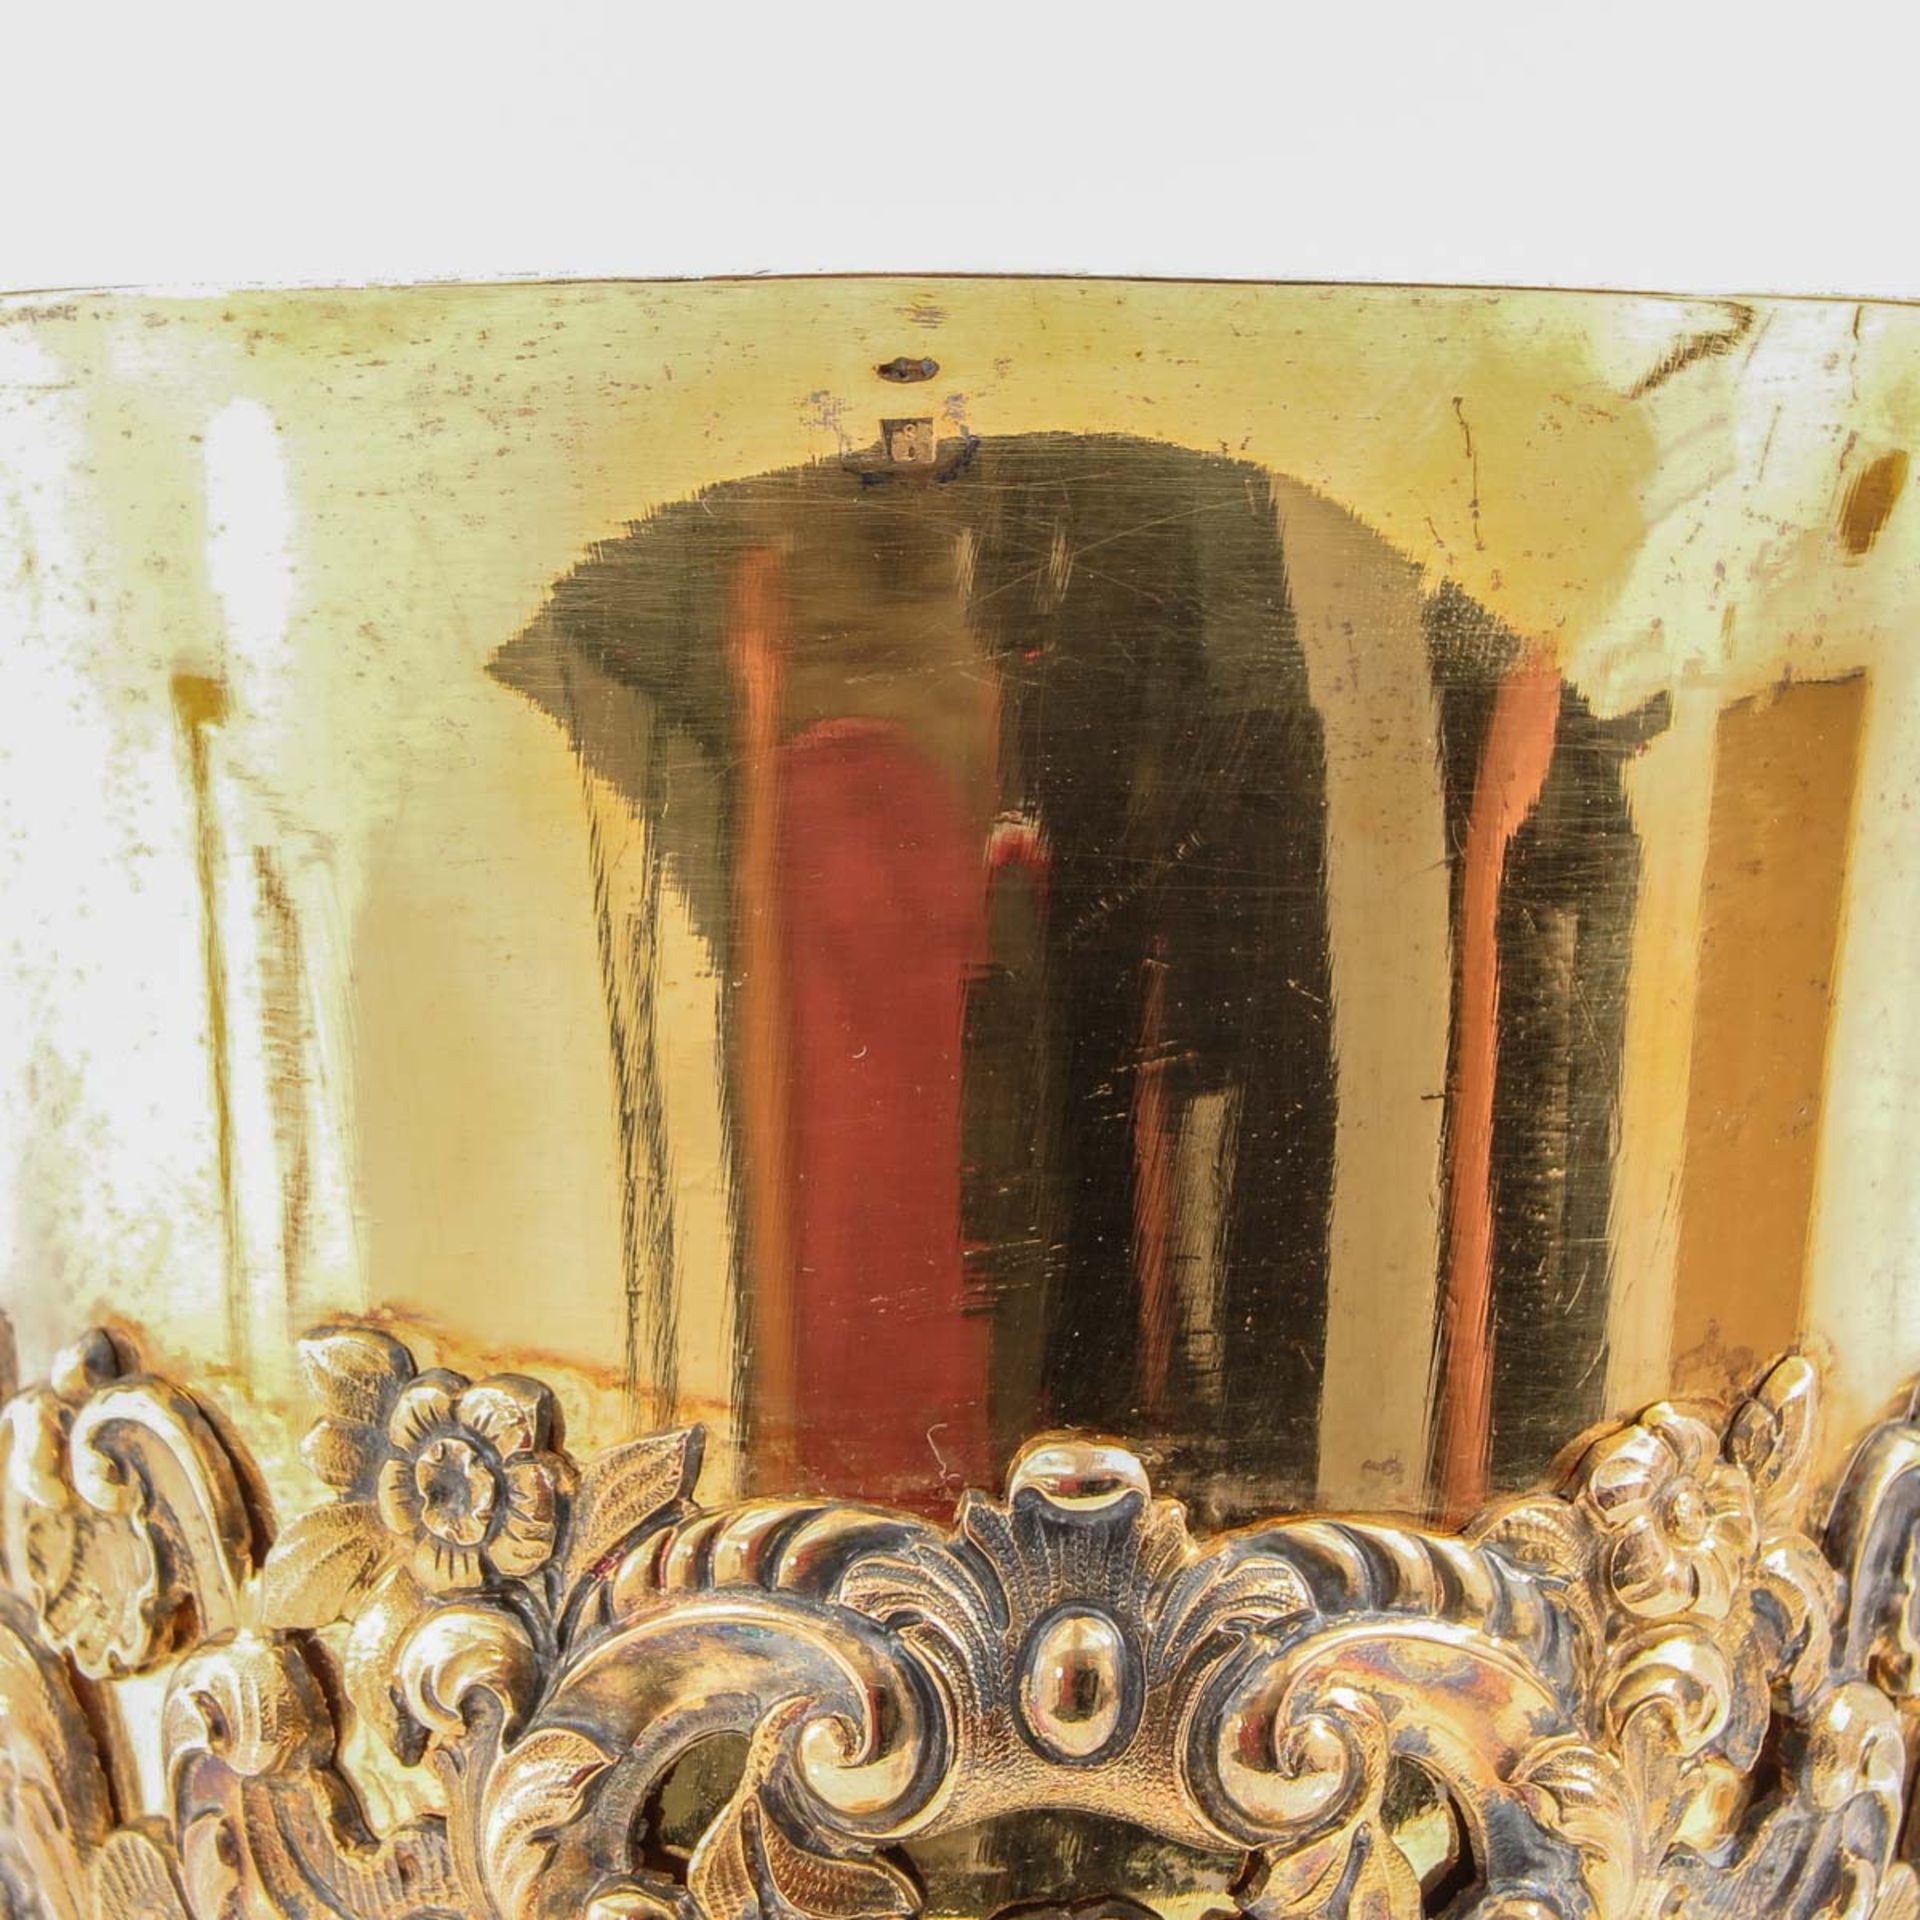 A Very Large 19th Century Gold Plated Silver Chalice - Image 7 of 10